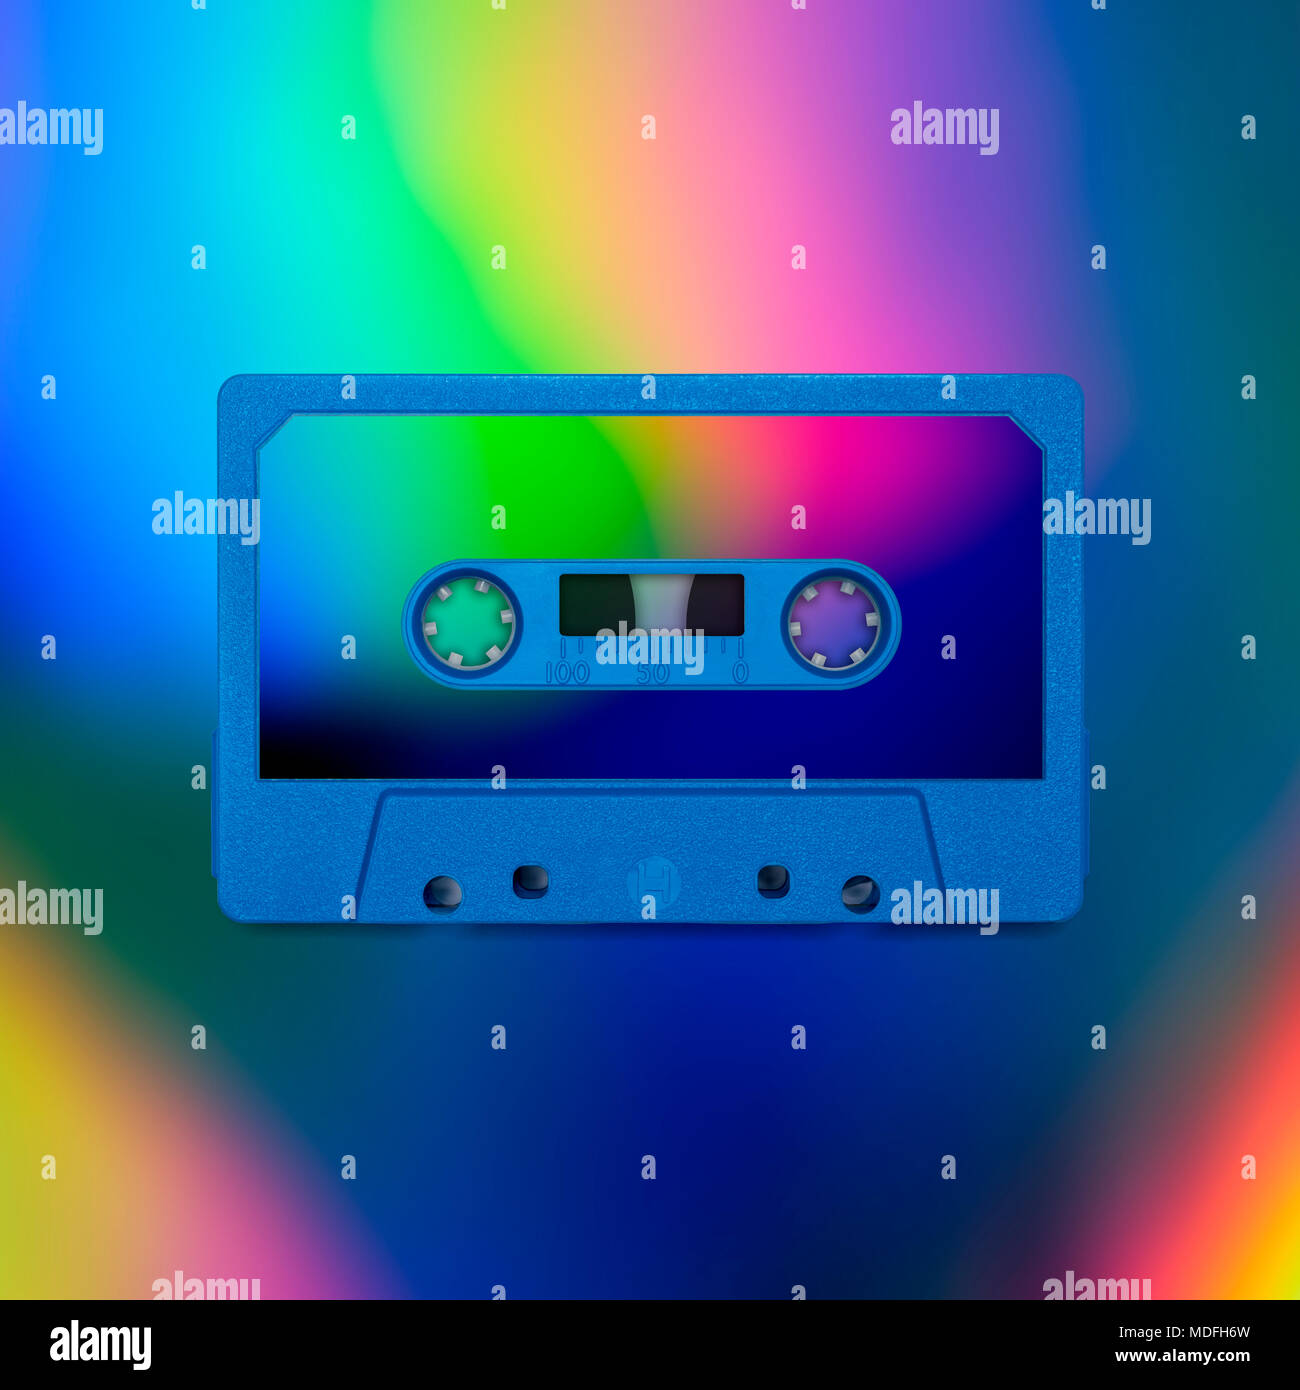 Cassette tape nostalgia, isolated and presented in intense iridescent holographic colors, for creative design cover, poster, book, printing, gift card Stock Photo